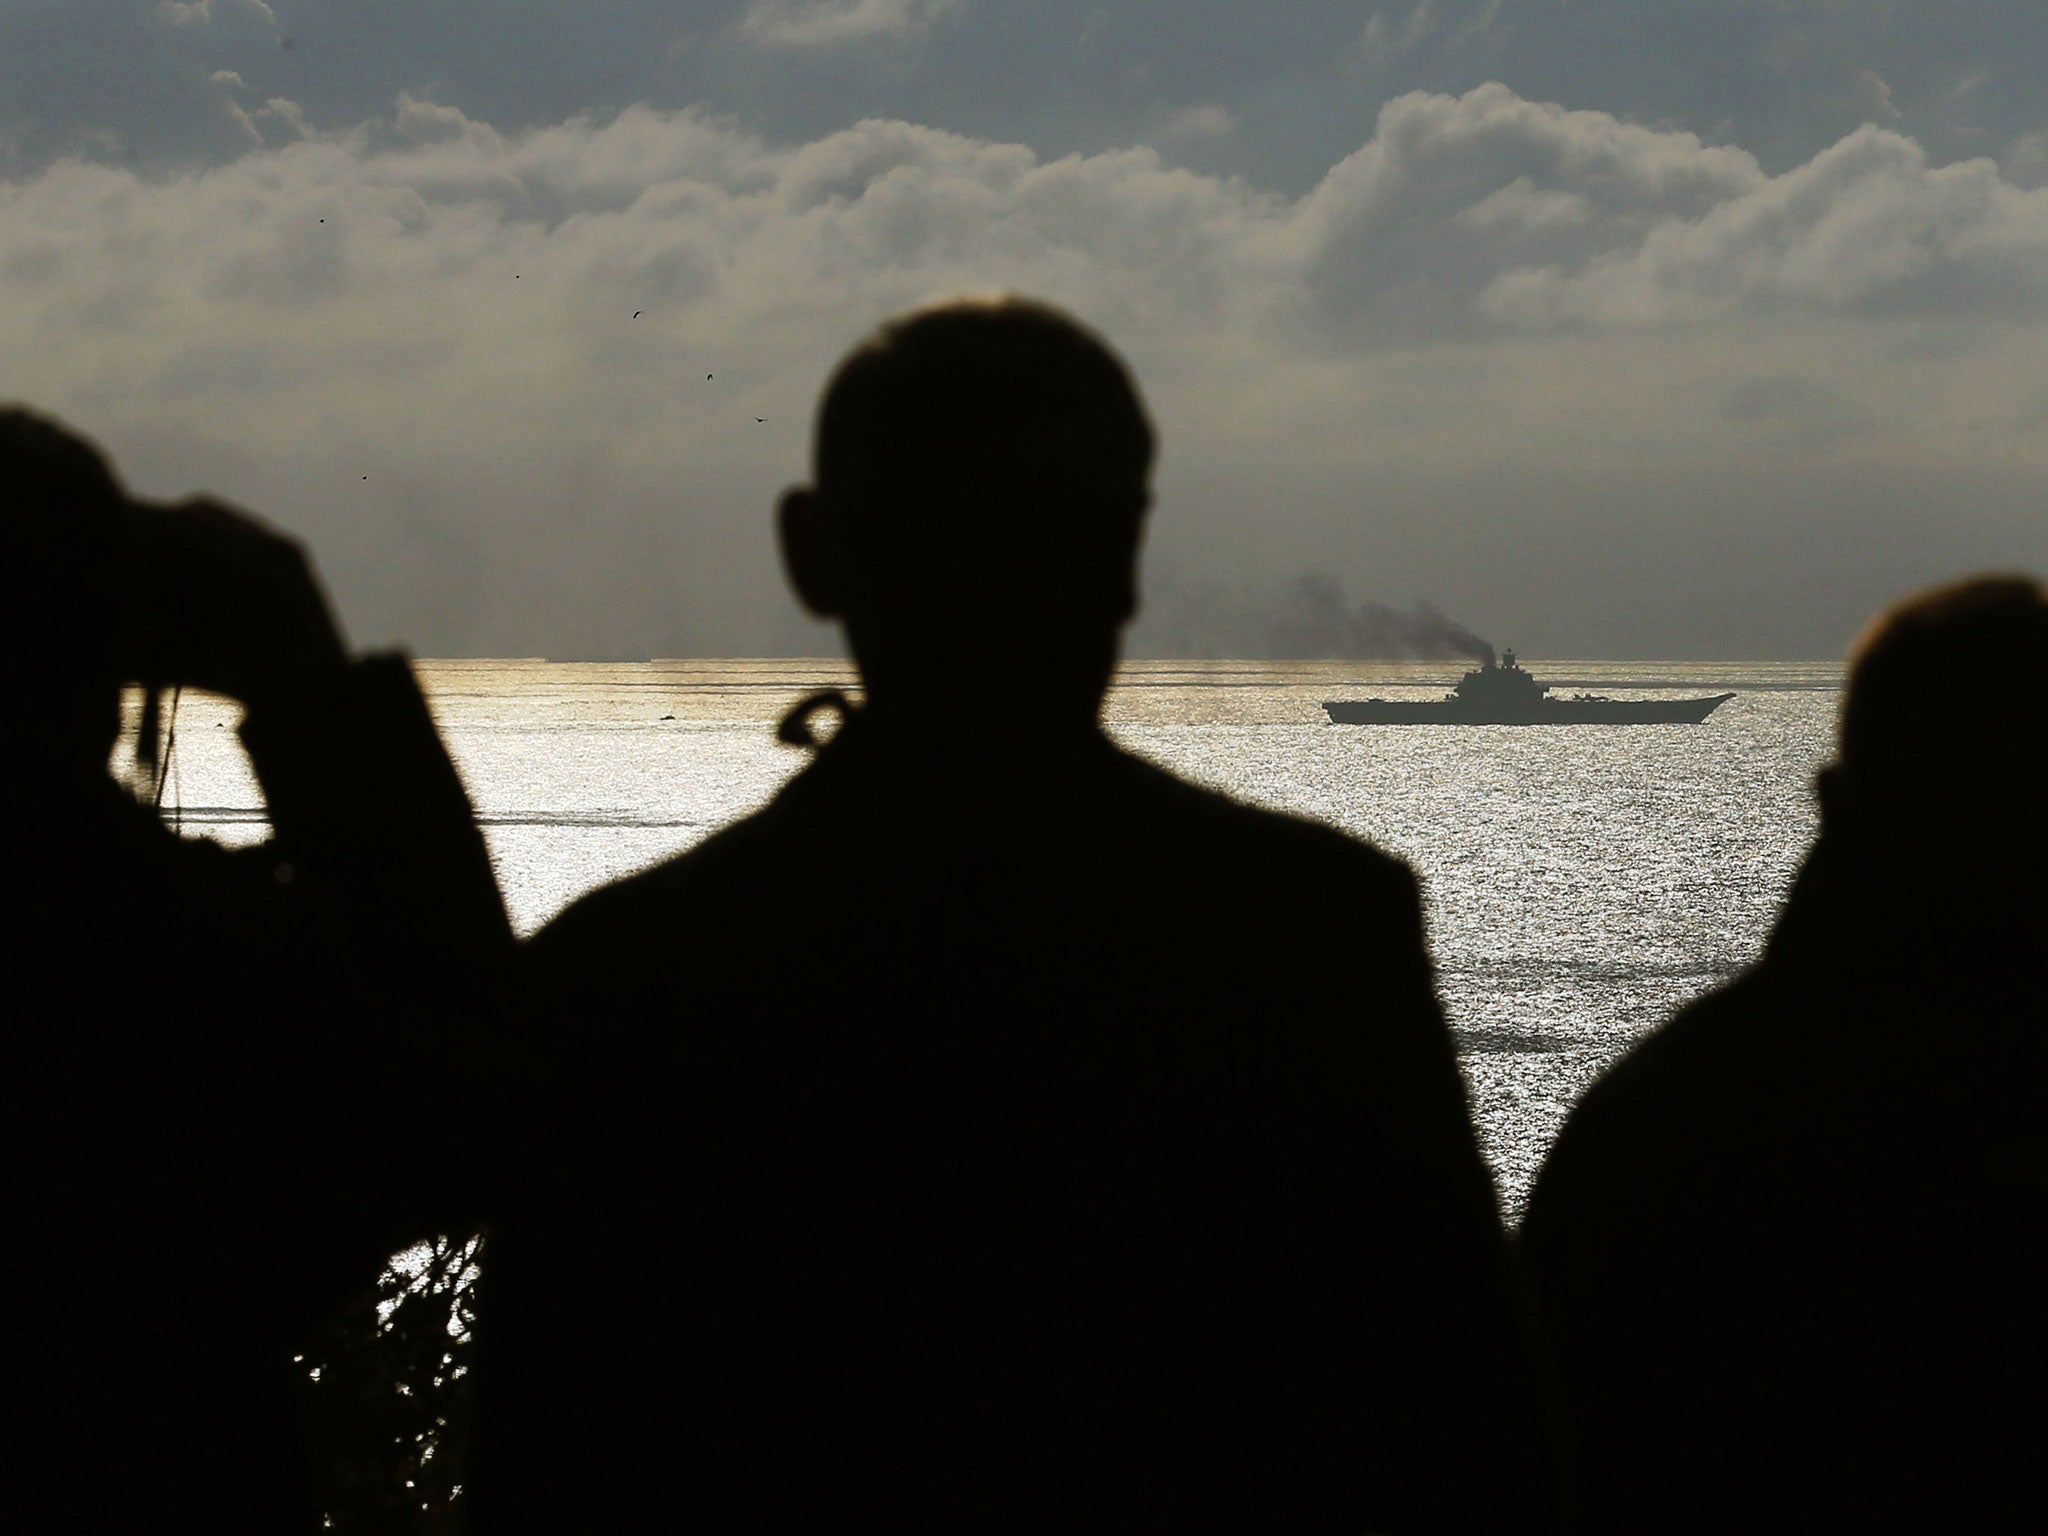 People watch as the Russian aircraft carrier Admiral Kuznetsov passes through the Strait of Dover on 21 October 2016